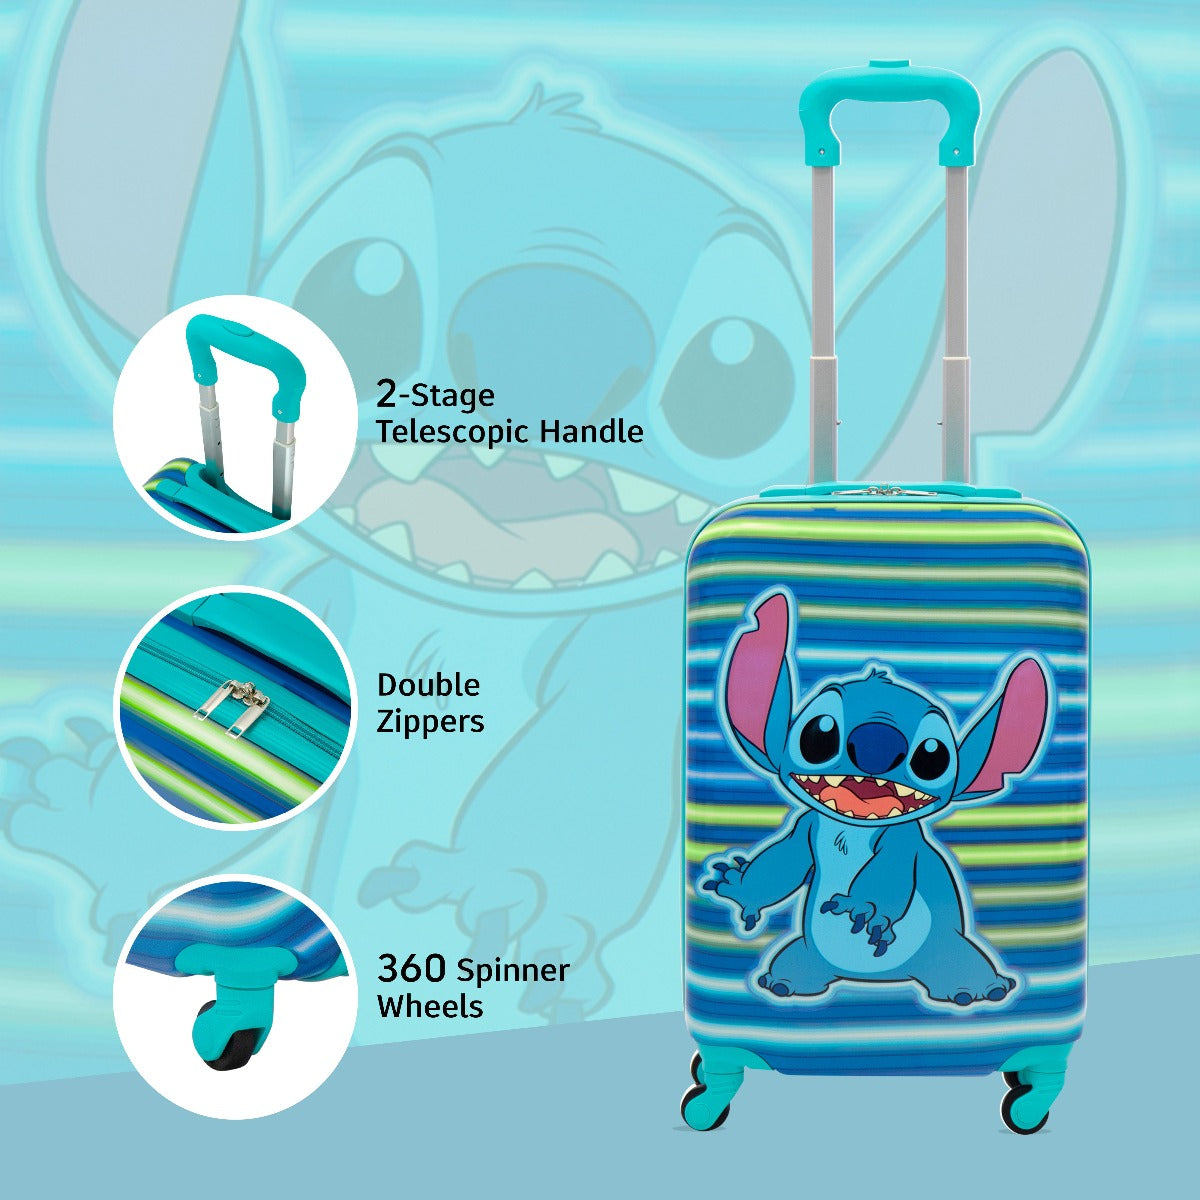 Disney Ful Stitch Neon Stripe Hardside Spinner Suitcase - Blue 21" Best Carry On Luggage for Kids